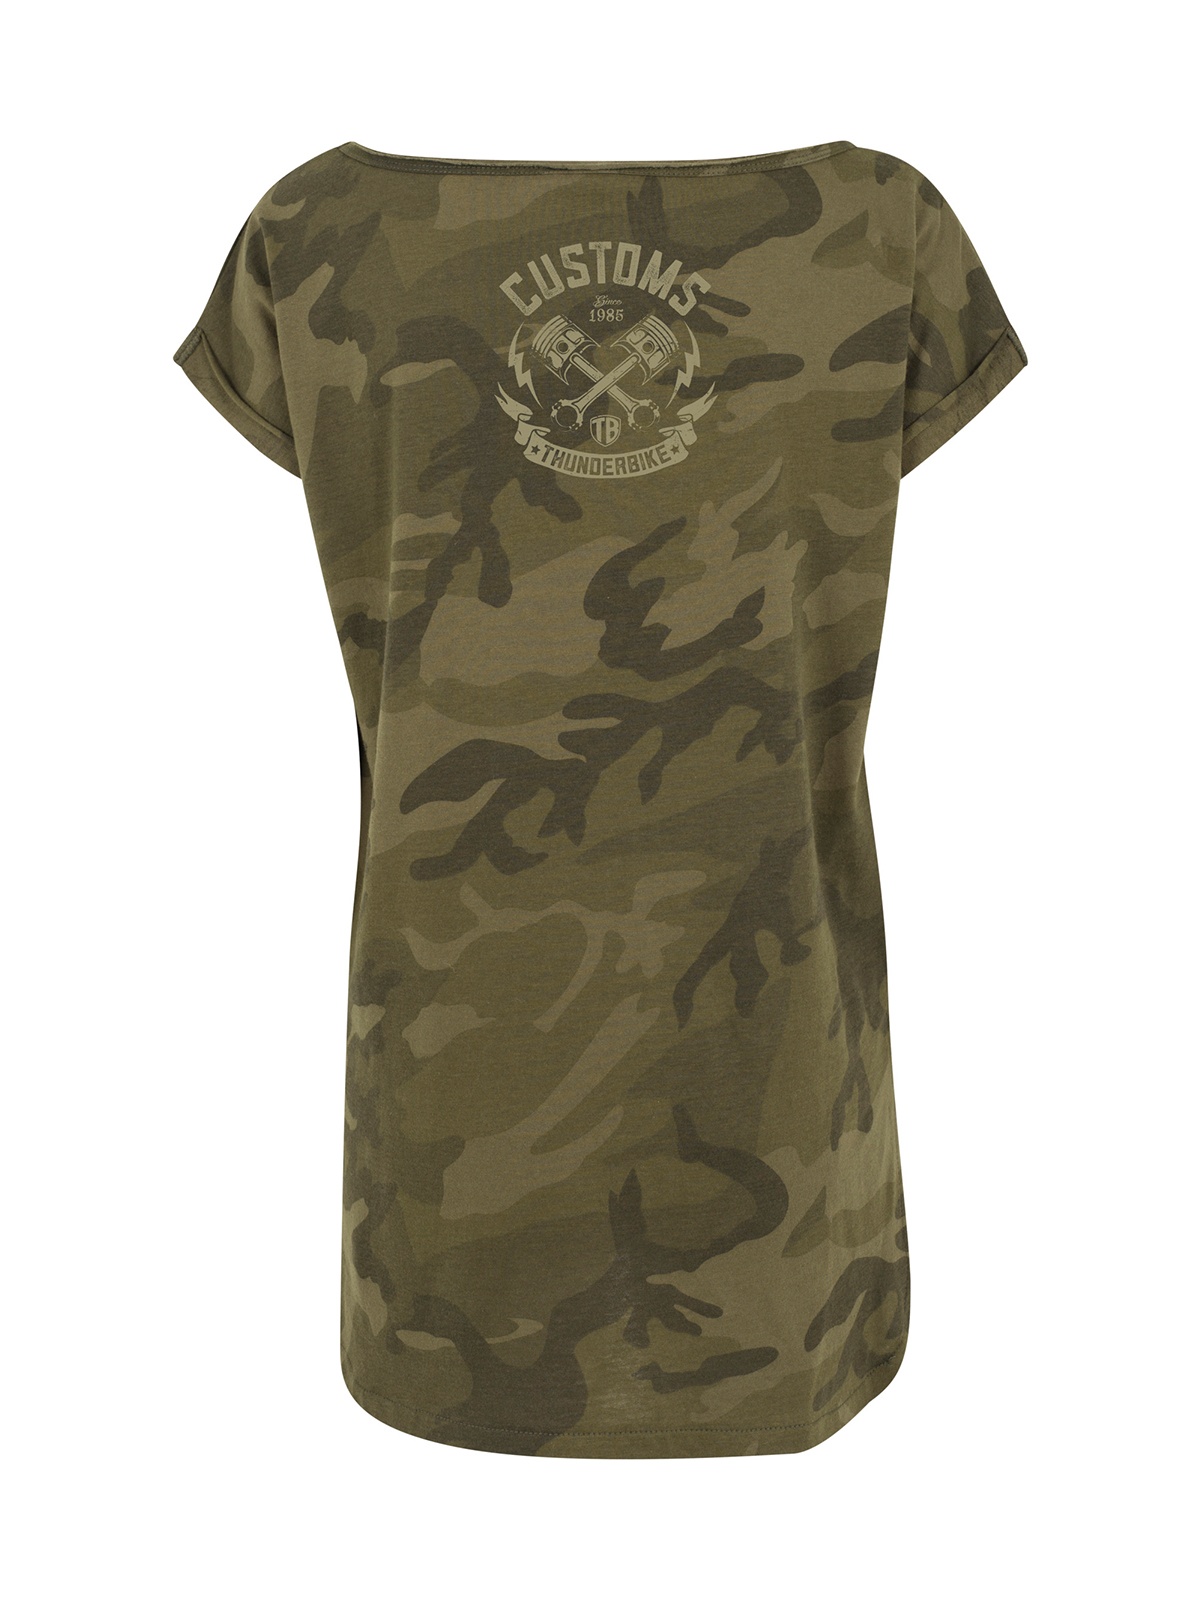 military t shirts for women